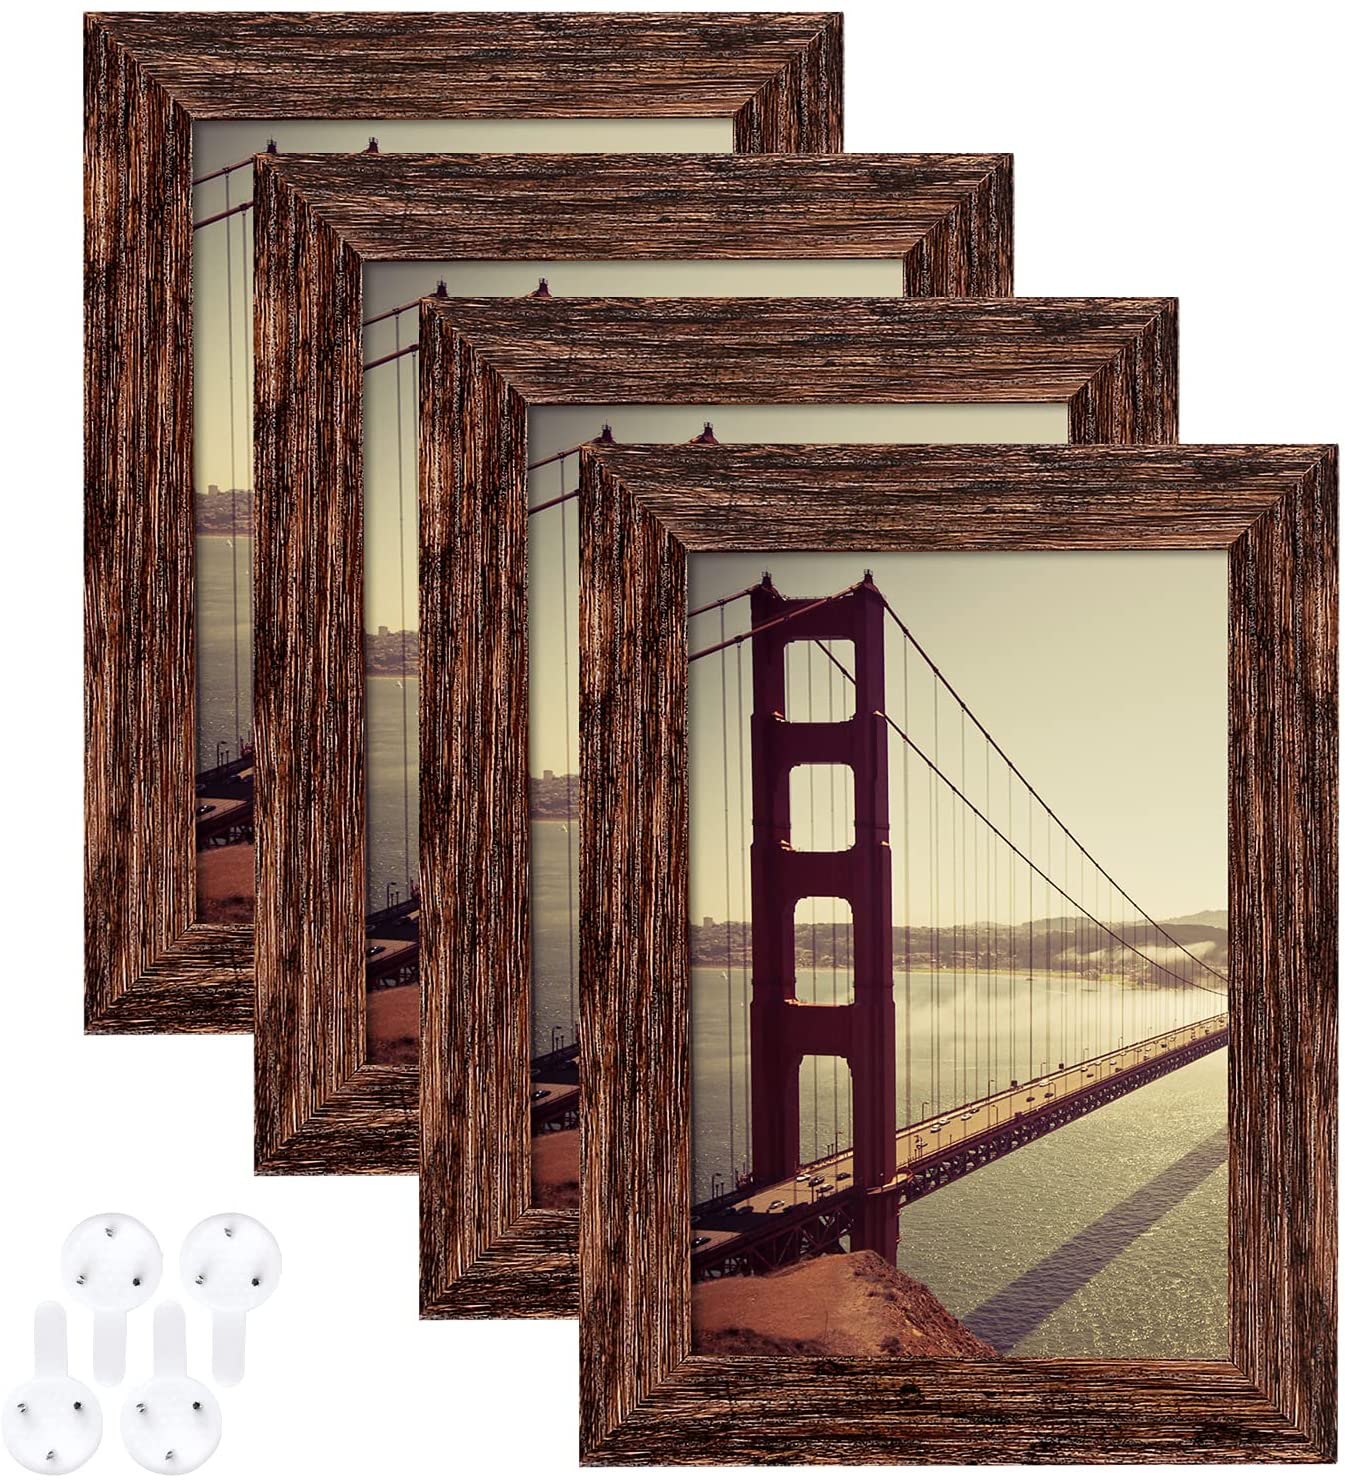 BAIJIALI 4x6 Picture Frame Rustic Brown Wood Pattern Set of 4 with Tempered Glass,Display Pictures 3.5x5 with Mat or 4x6 Without Mat, Horizontal and Vertical Formats for Wall and Table Mounting